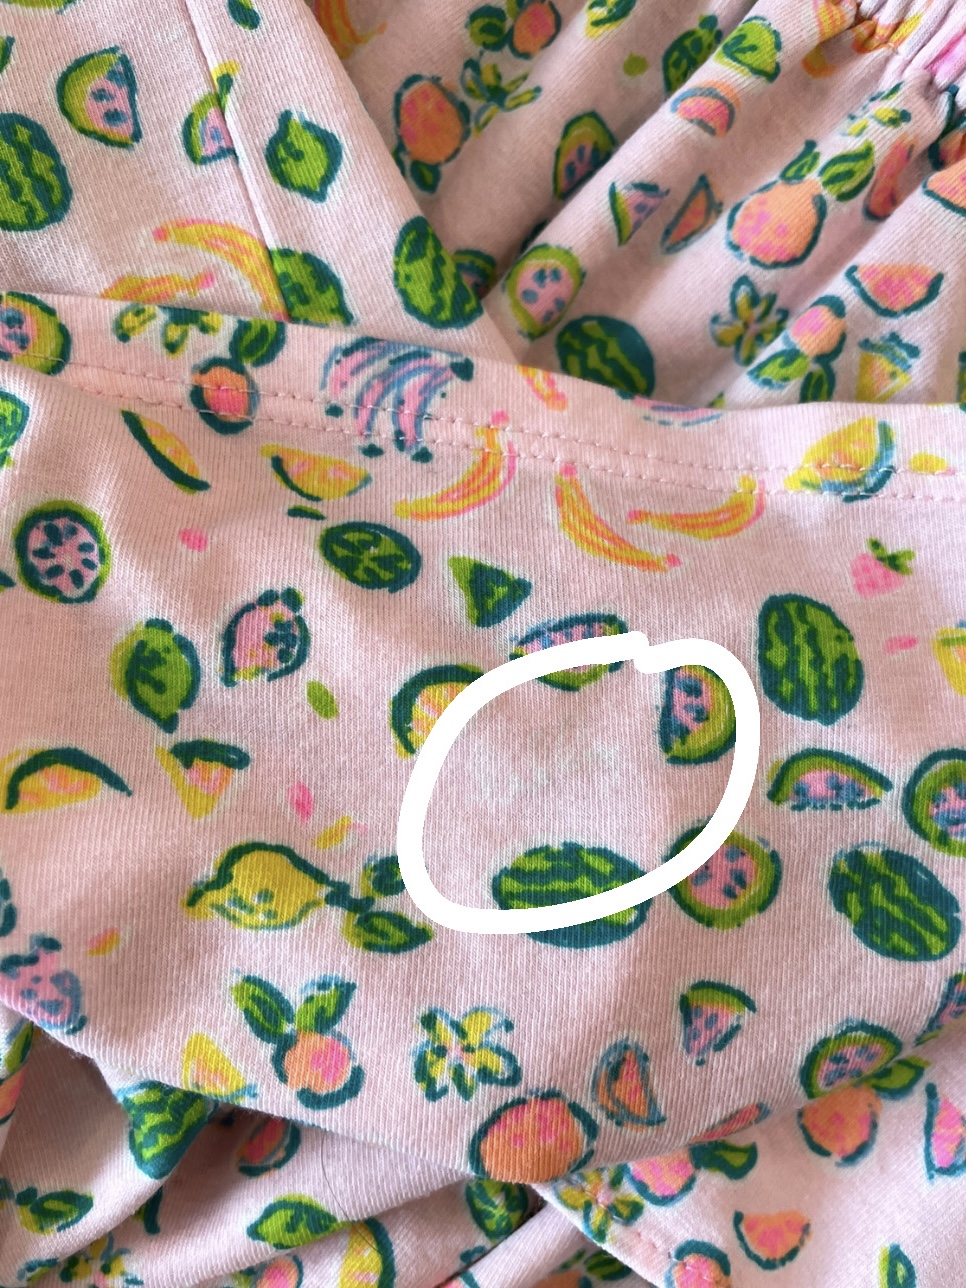 Authenticating Lilly Pulitzer for Reselling